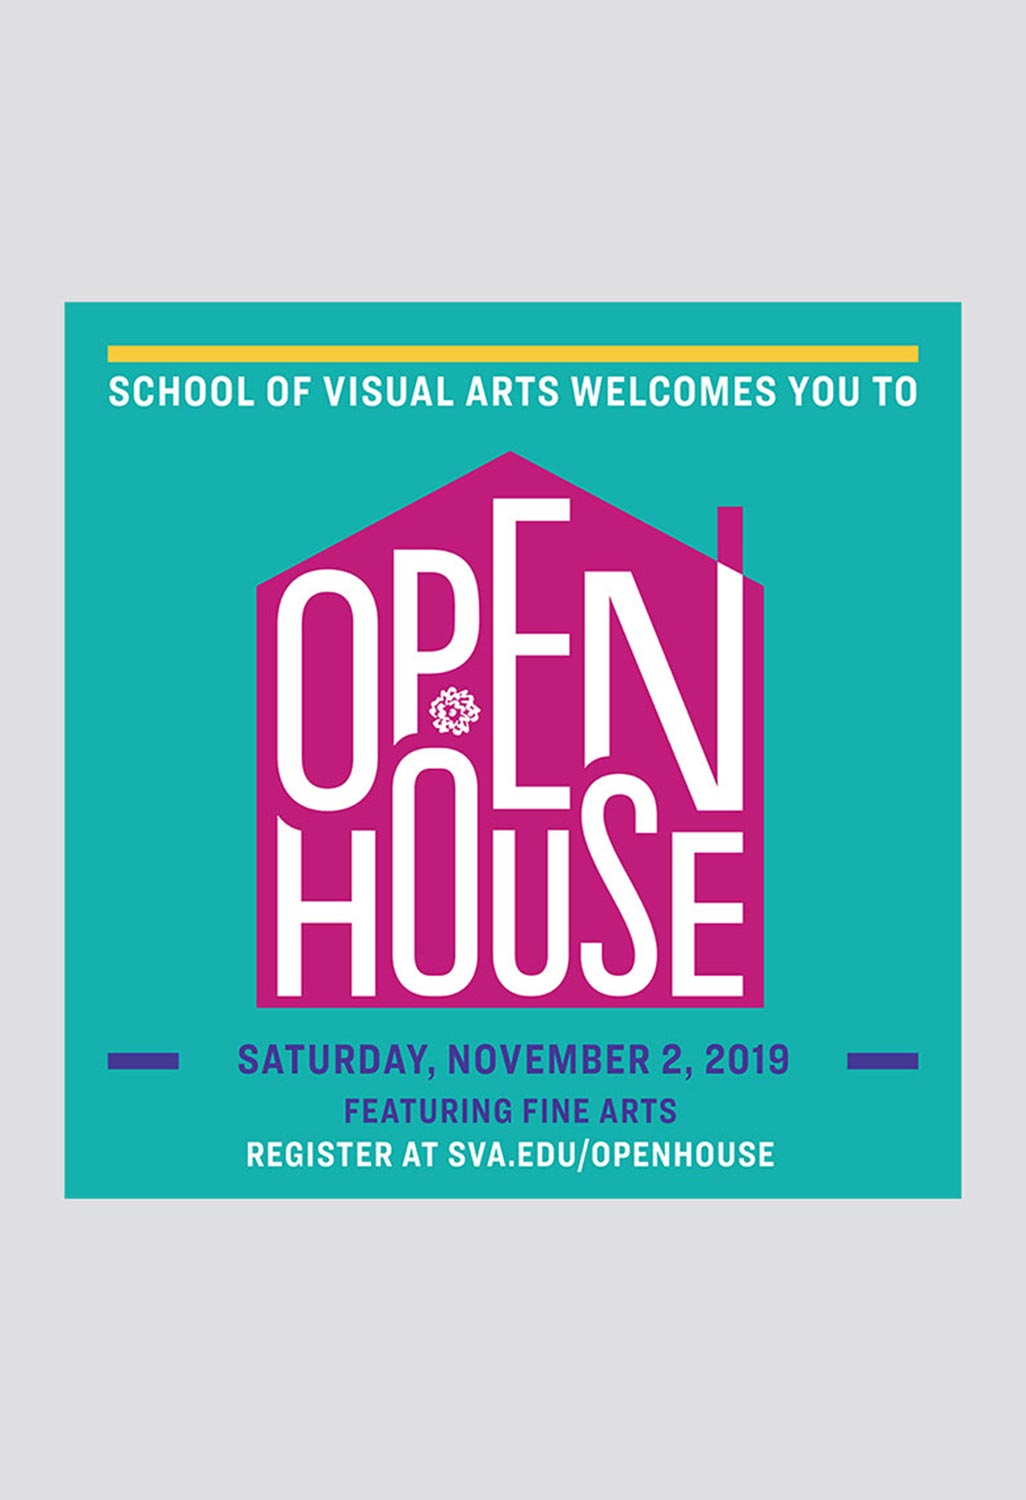 Poster image for the SVA Fall 2019 Open House that the BFA Fine Arts department is participating in on November 2. The poster is teal and pink with white and blue text.